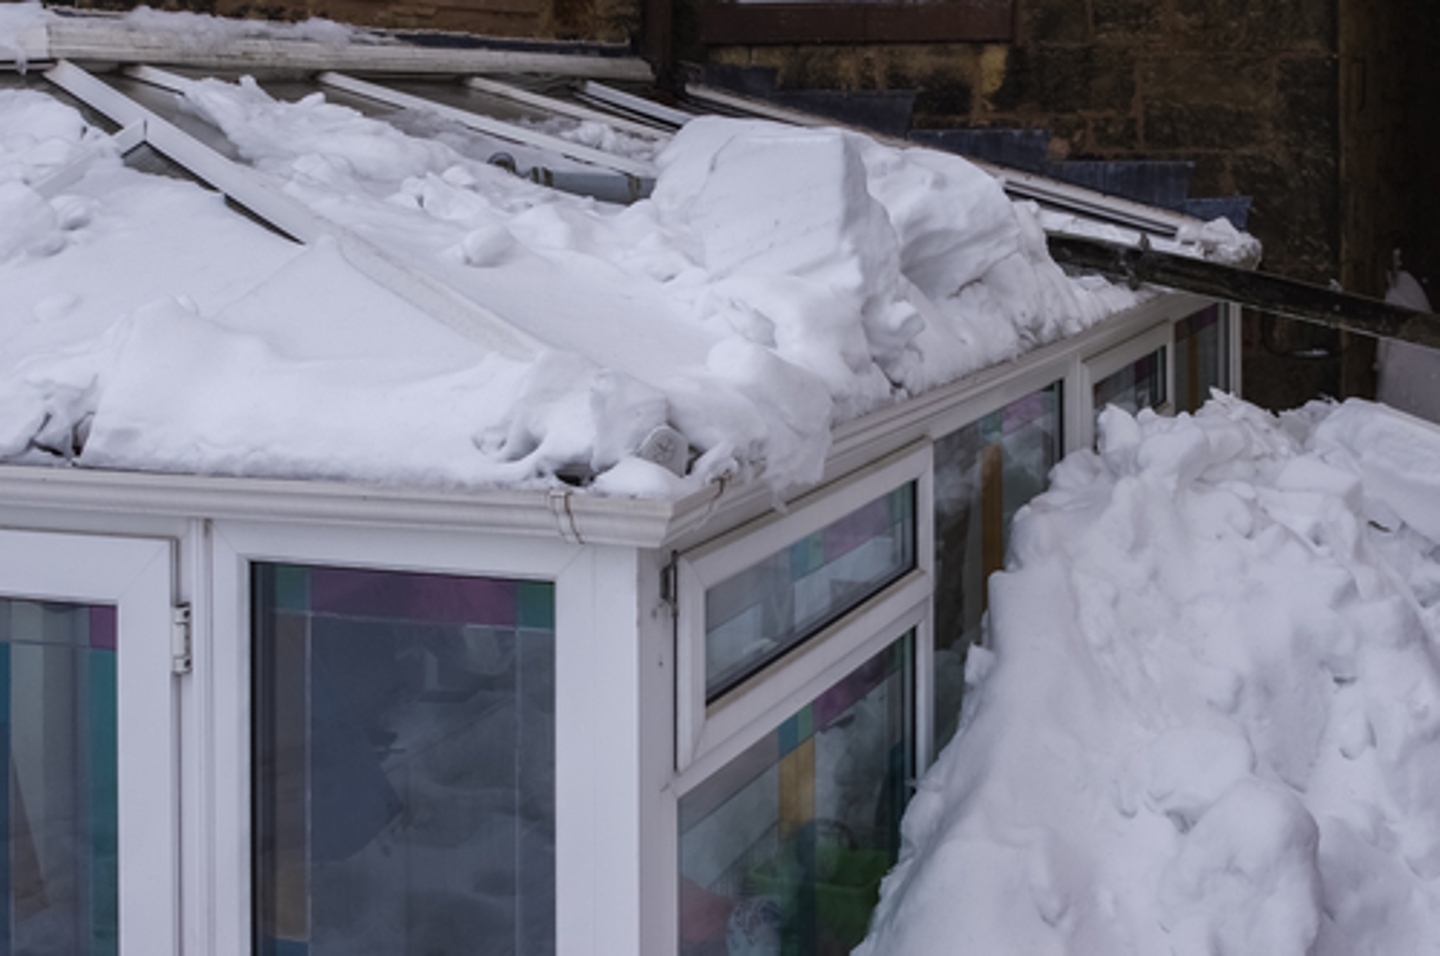 Heavy snow and even snow drifts can cause home damage leading to water damage and mold damage